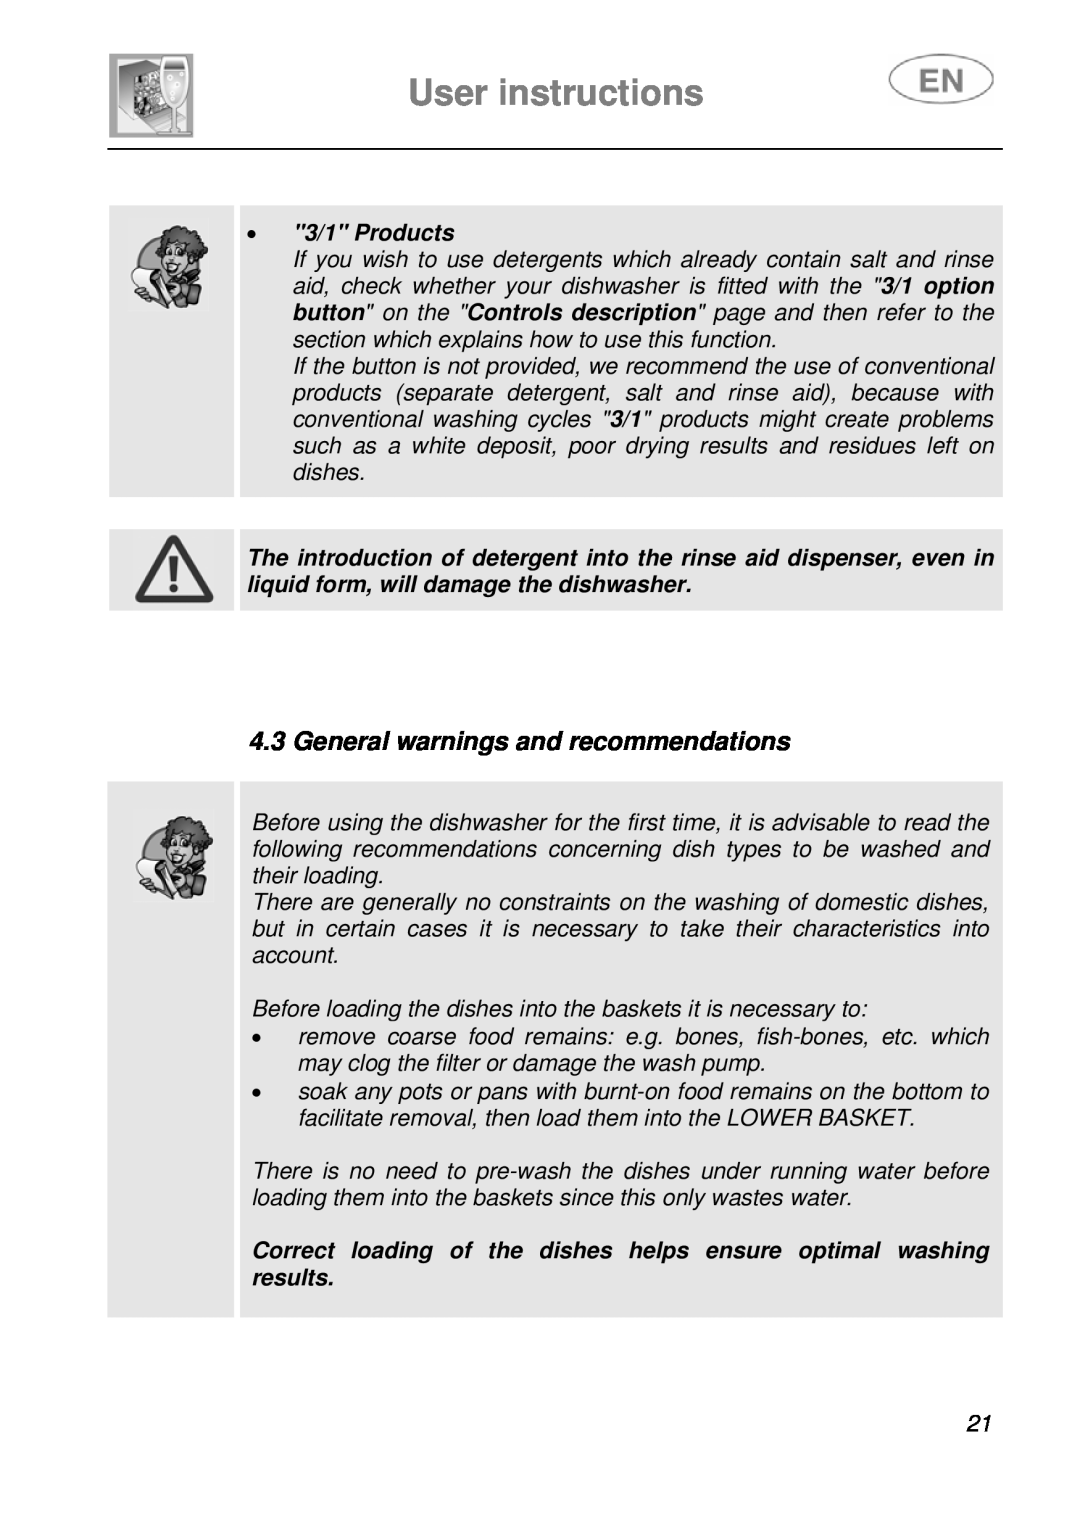 Smeg DF410BL1 instruction manual General warnings and recommendations, 3/1 Products, User instructions 